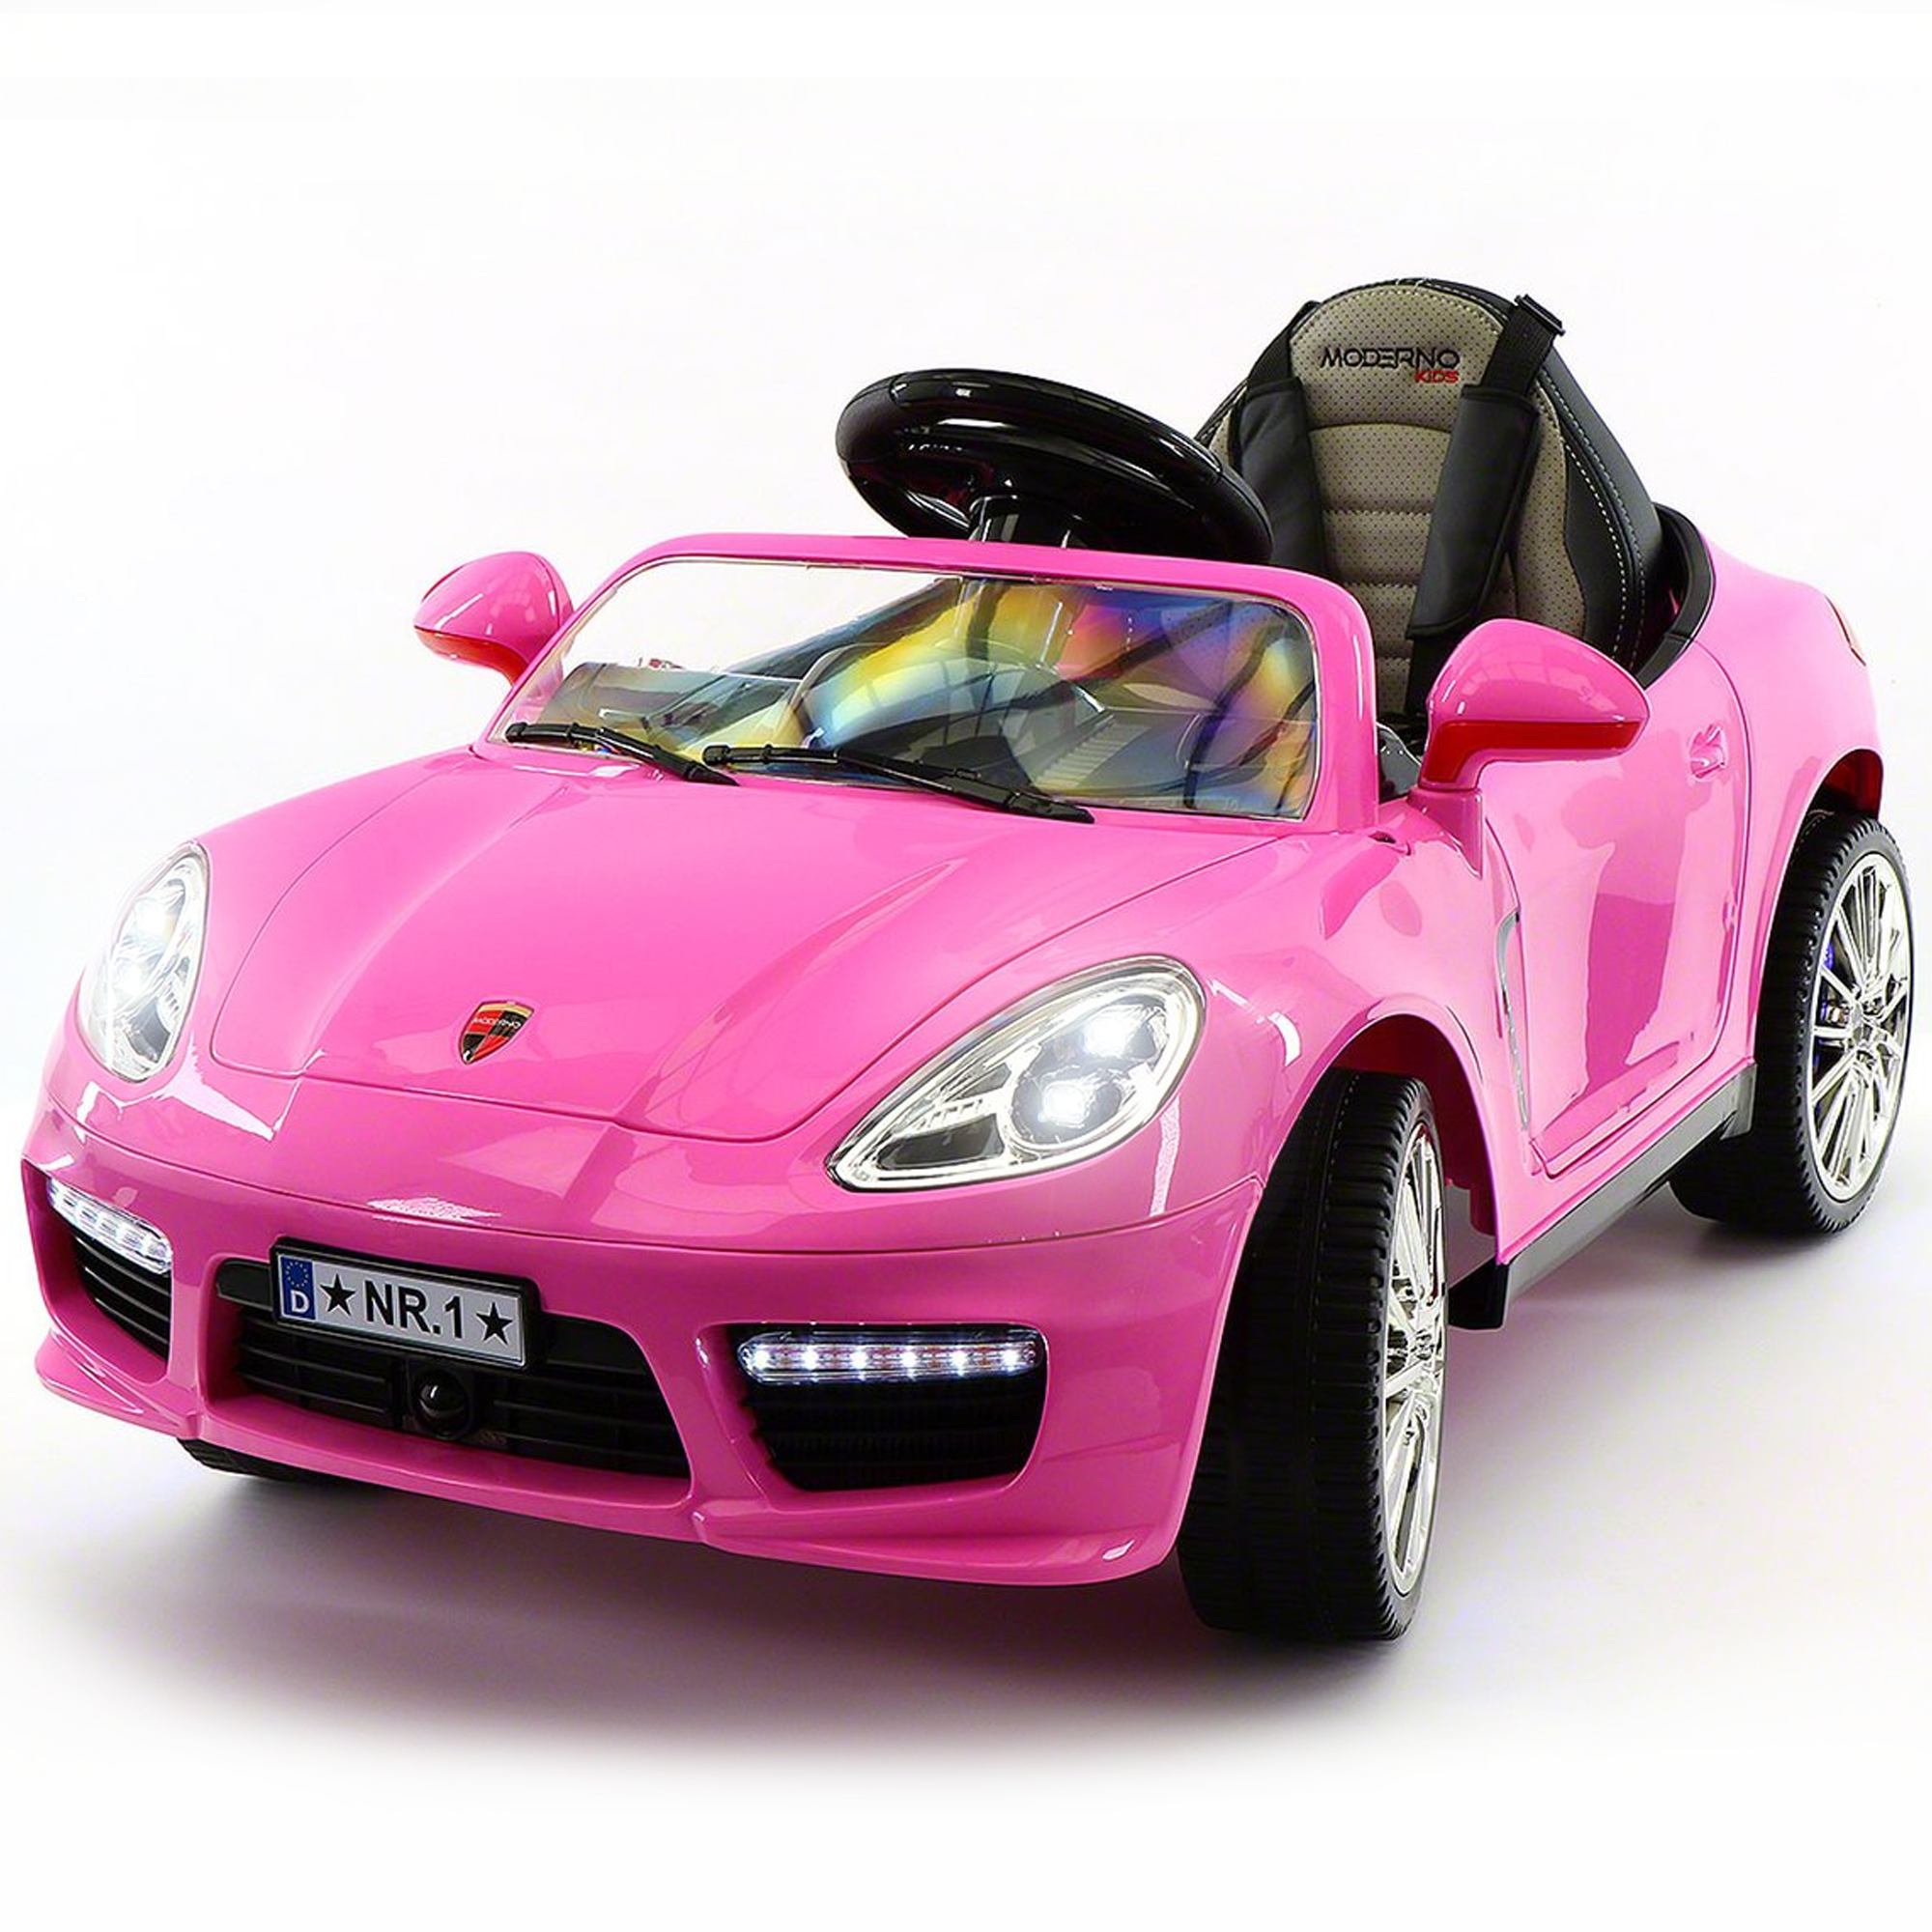 pink ride on car